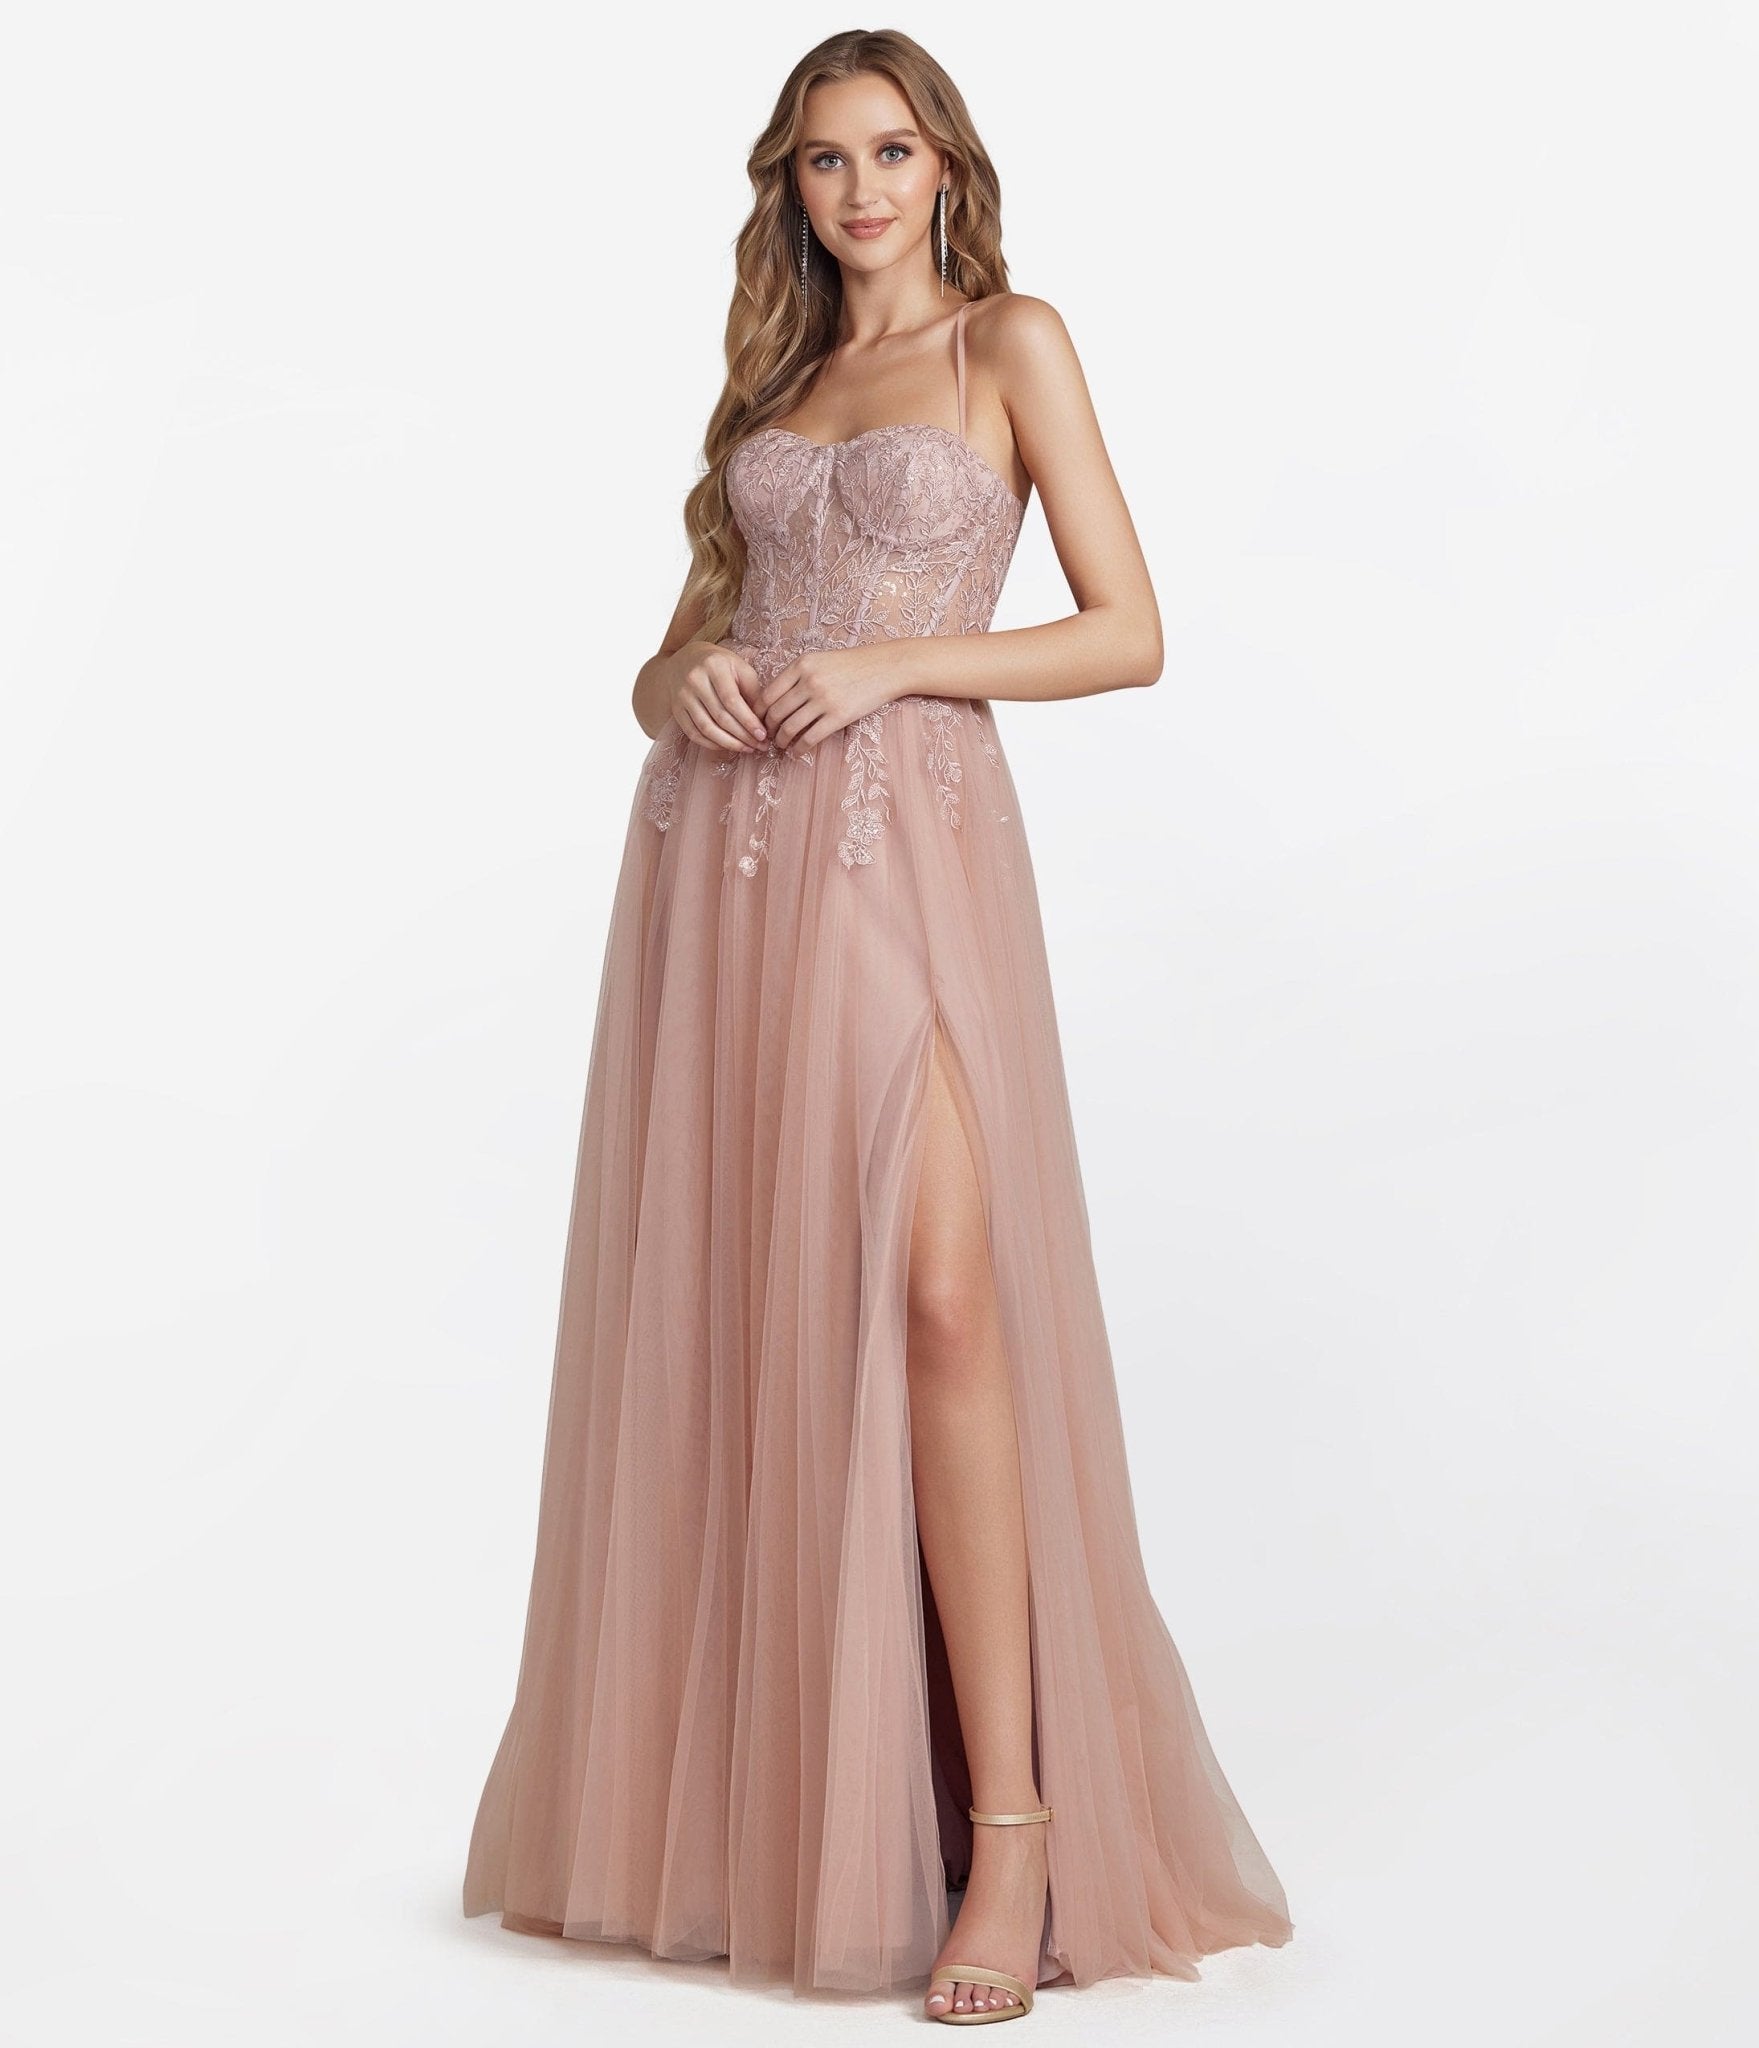 

Dusty Rose Corset Tulle Prom Ball Gown